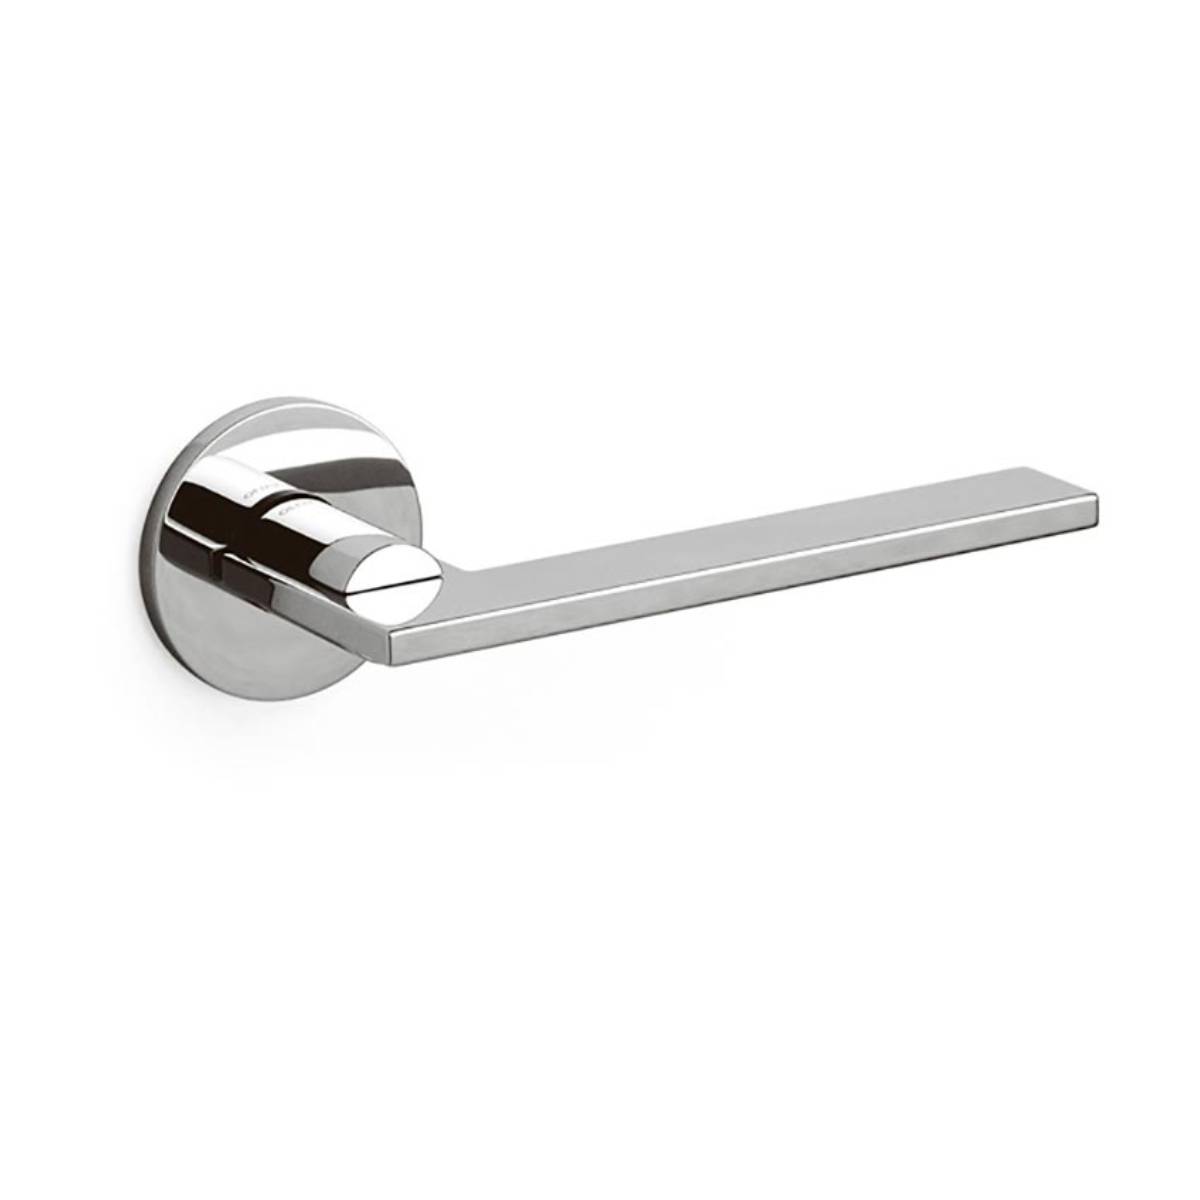 pair of modern and contemporary r koolhaas glossy chrome brass door handles